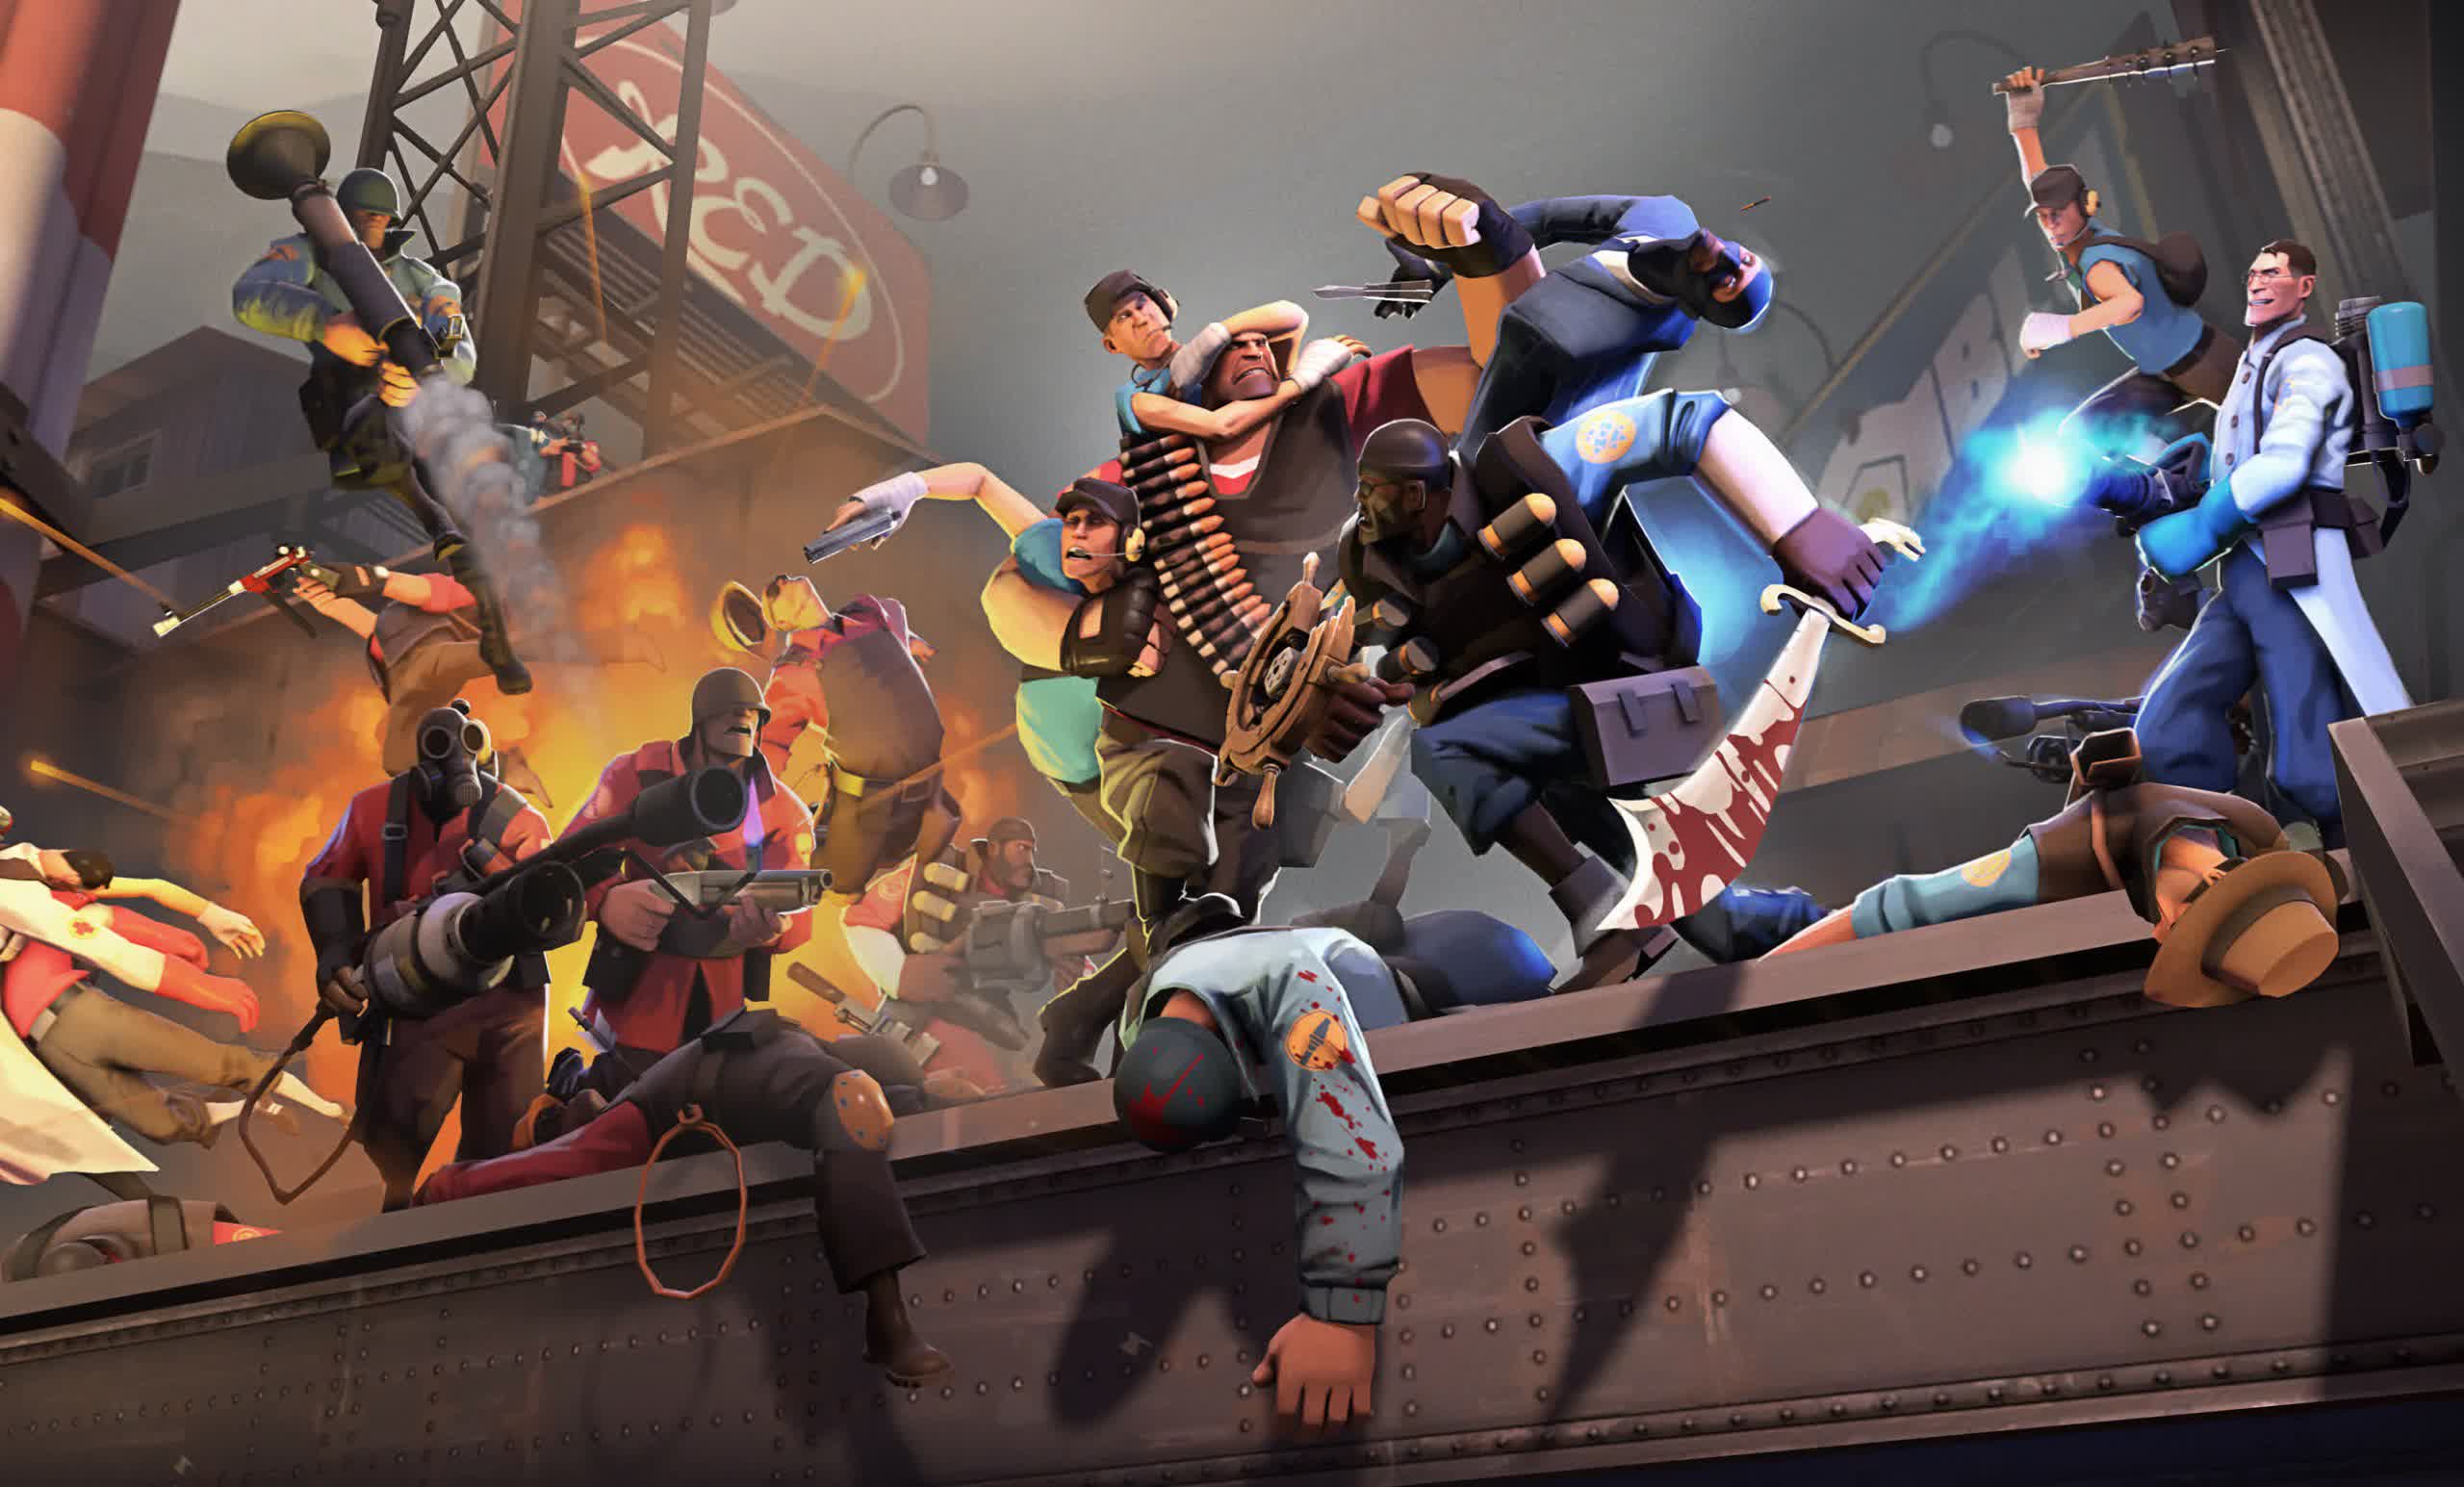 Team Fortress 2 update introduces 64-bit support and defaults to 400fps gameplay – The TechLead